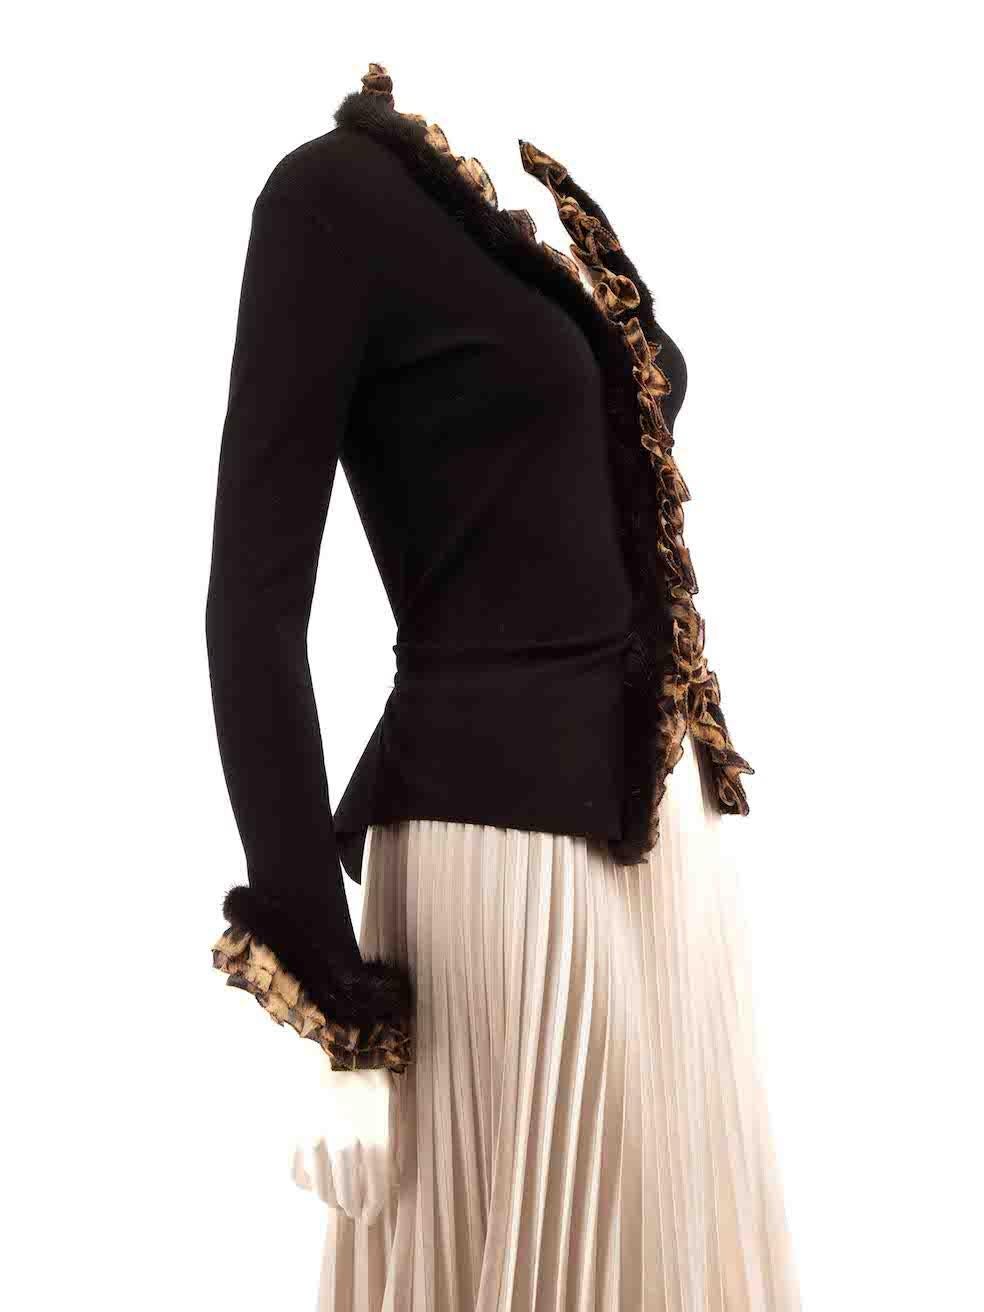 CONDITION is Very good. Minimal wear to jacket is evident. Light wear to sleeves with pulls to the weave on this used Roberto Cavalli designer resale item.
 
 
 
 Details
 
 
 Black
 
 Viscose
 
 Long sleeve cardigan
 
 Fine knitted and stretchy
 
